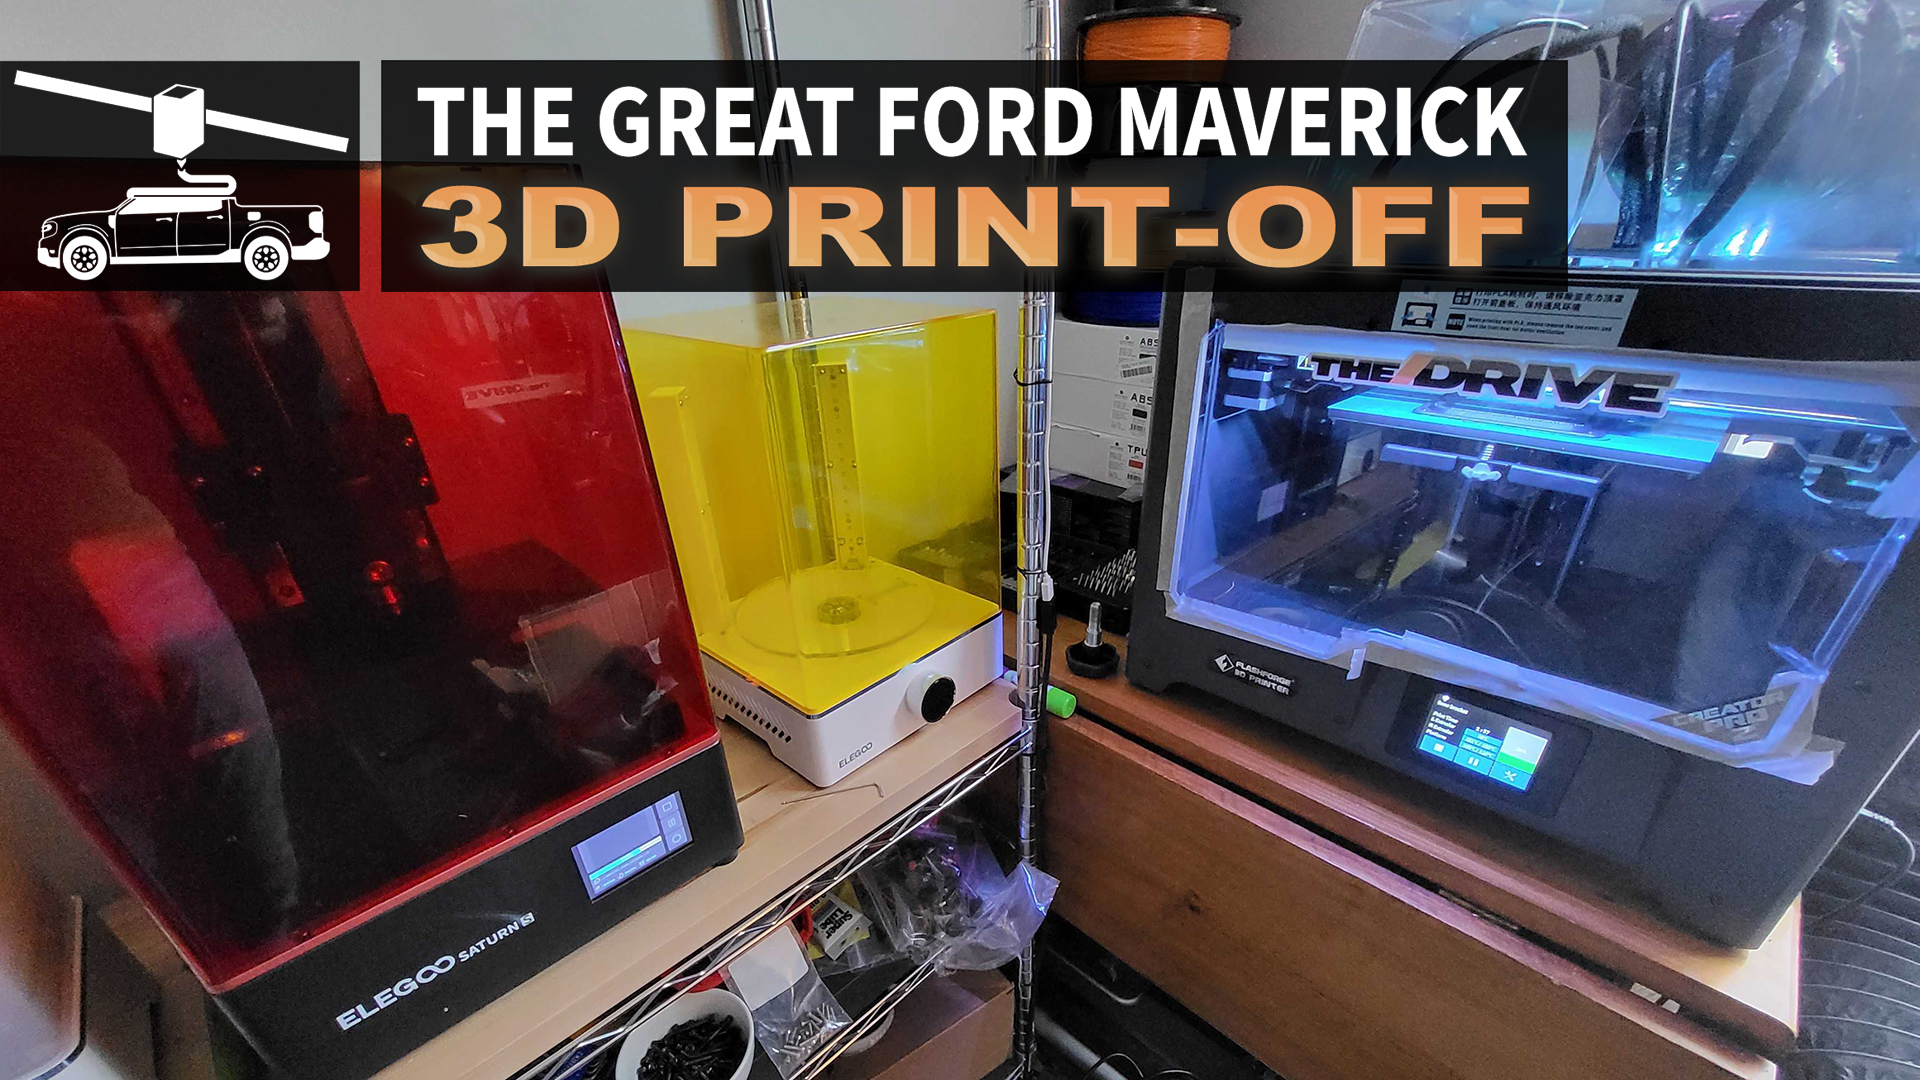 Here's How to Get Started 3D Printing Your Own Car Accessories